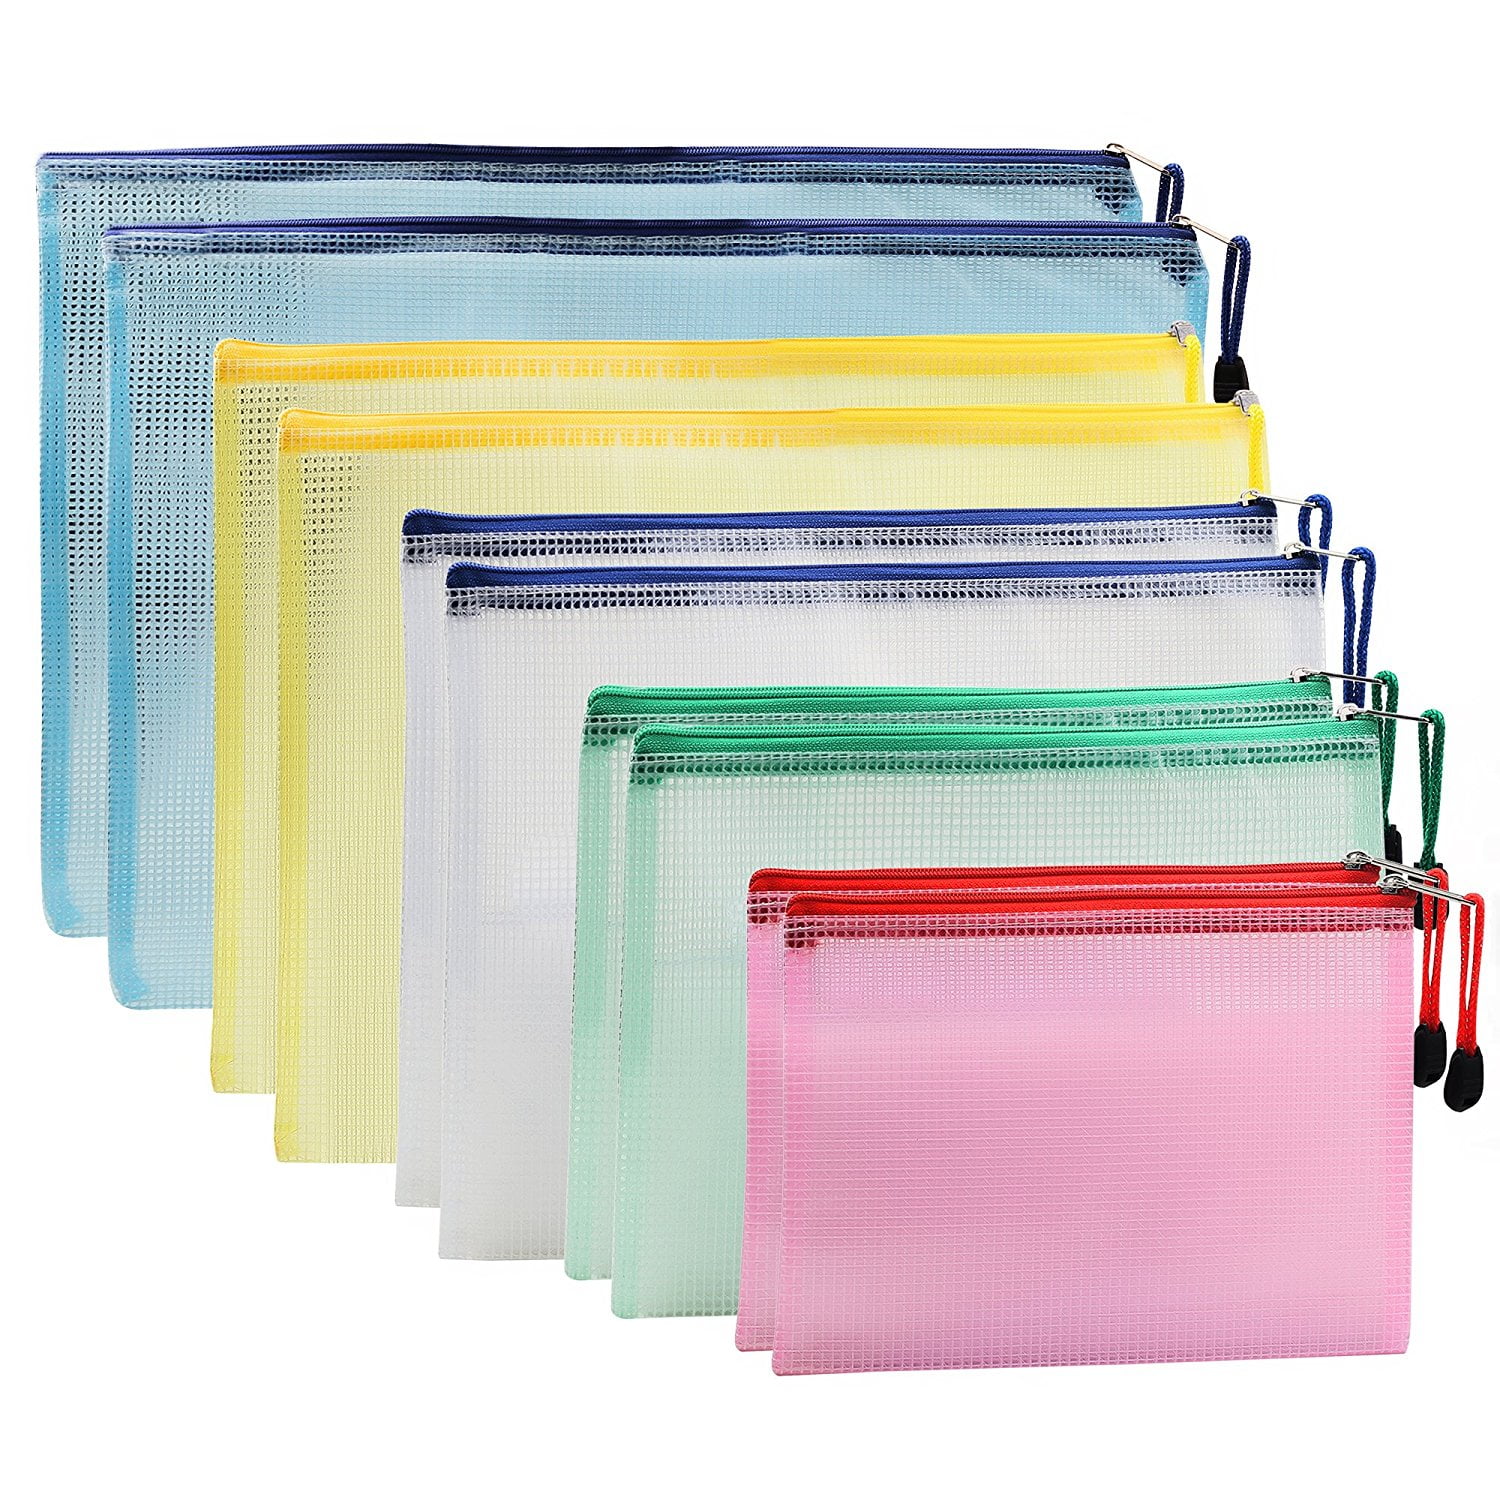 Waterproof Plastic Mesh Zipper Pouch for School Office Supplies 10 Pack Plastic Mesh Zipper Pouch Document Bag 10x14 in Toys Puzzles & Games Organizing Storage Zipper Pouches for Storage 